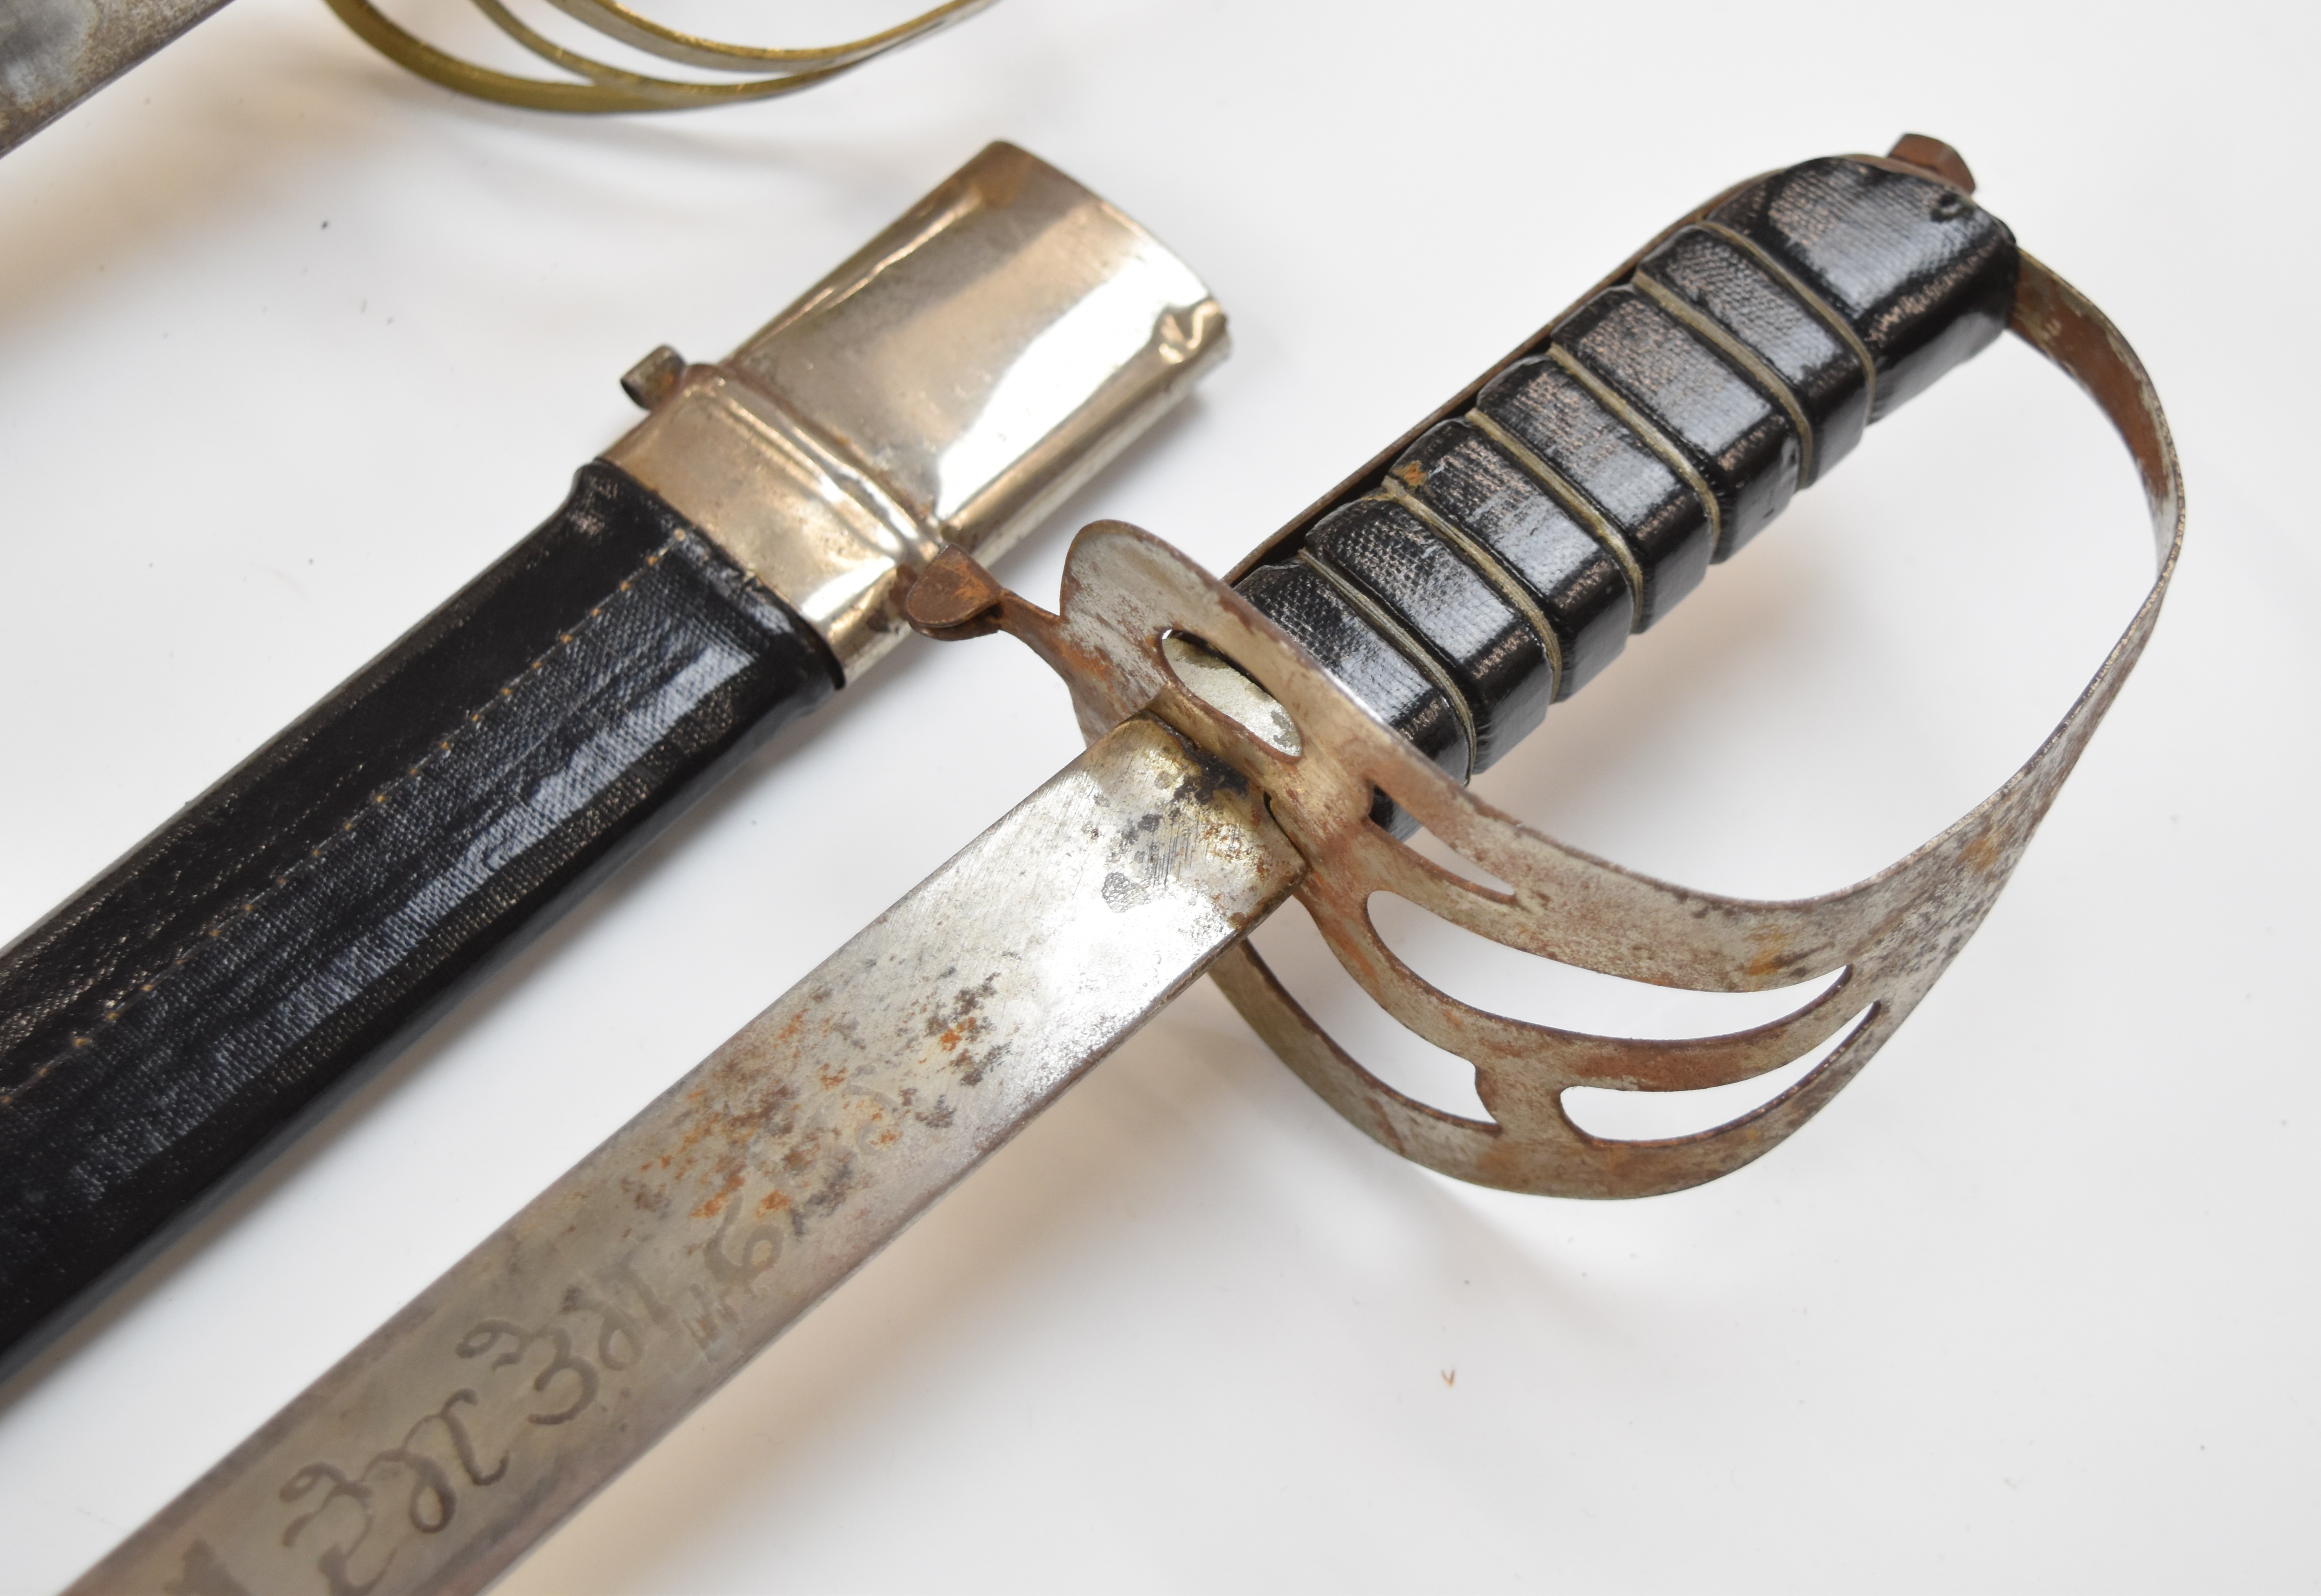 Three made in India tourist swords, longest blade 72cm. PLEASE NOTE ALL BLADED ITEMS ARE SUBJECT - Image 4 of 6